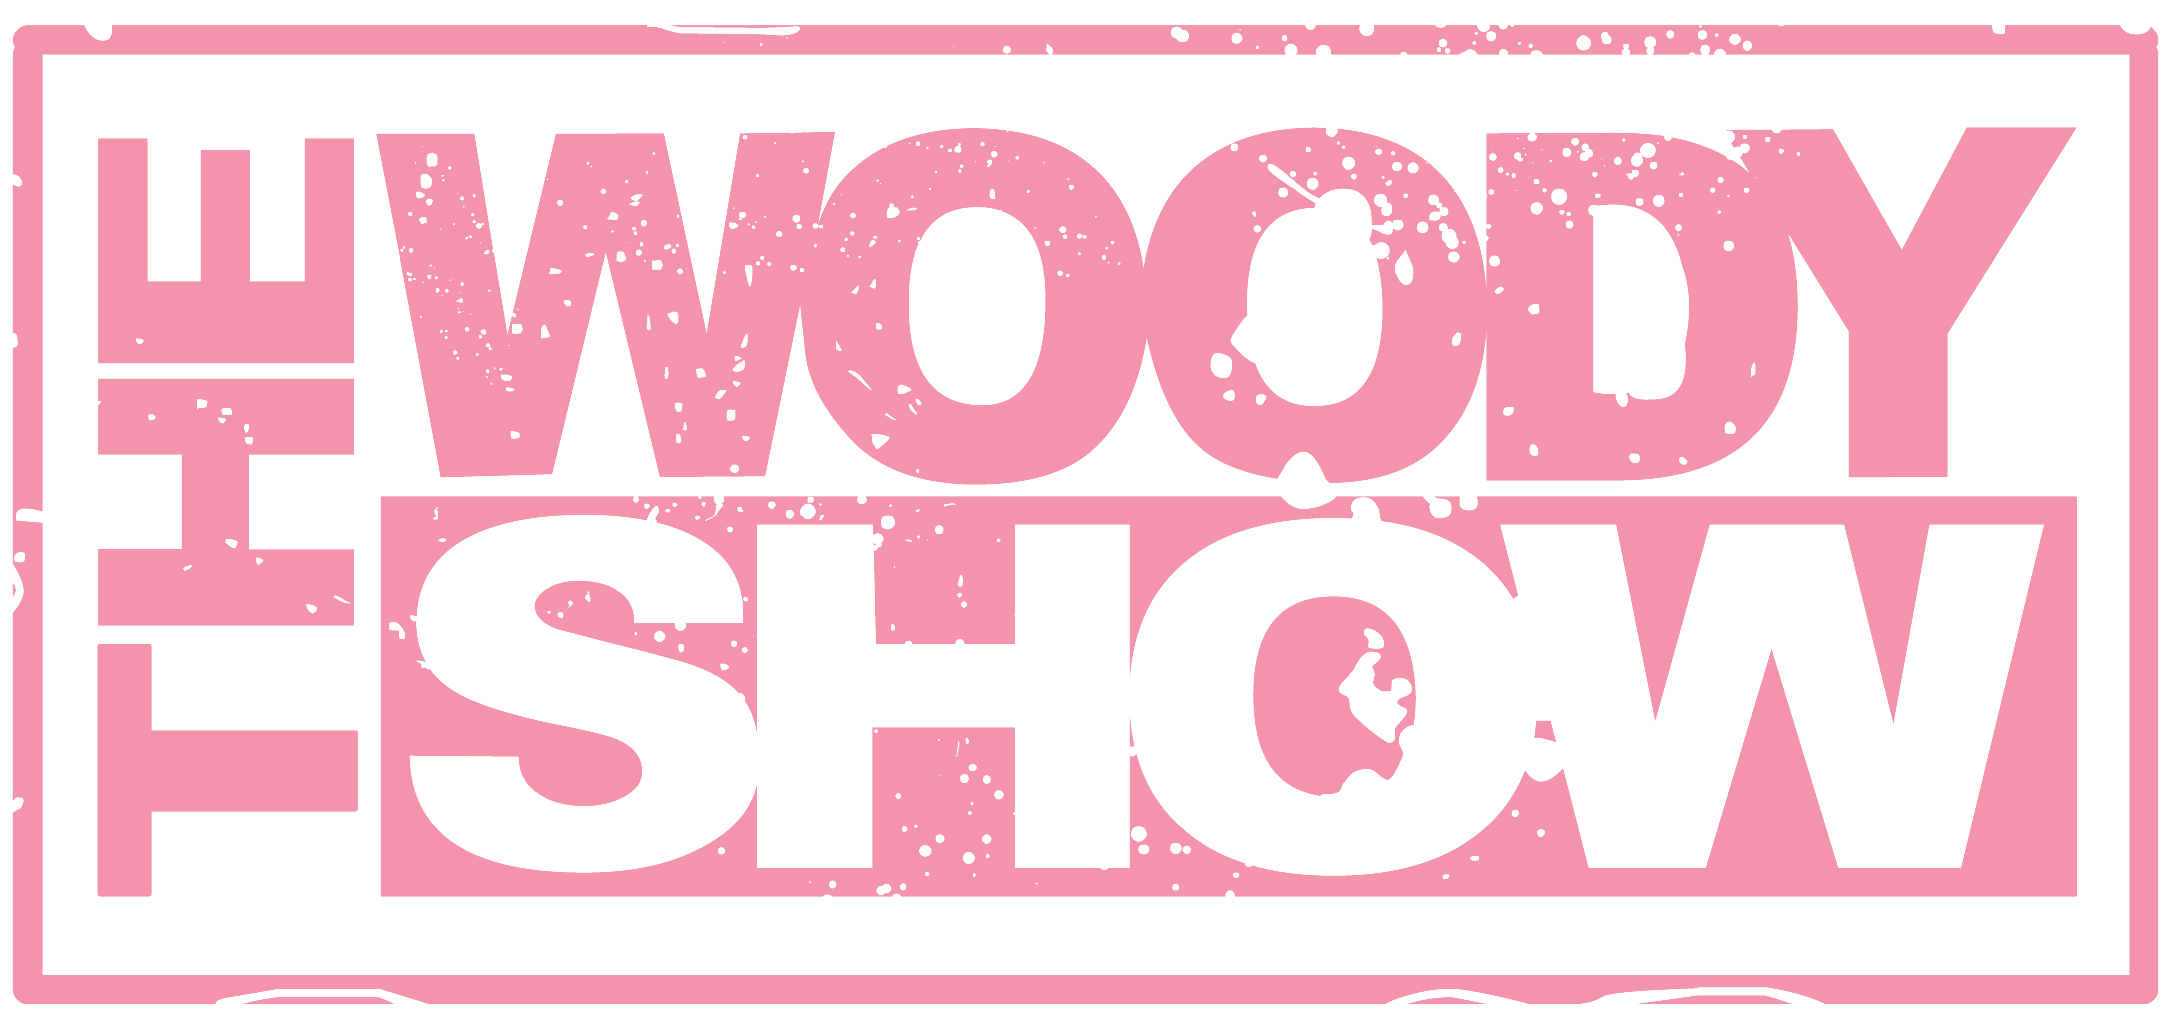 Featured on the woody Show